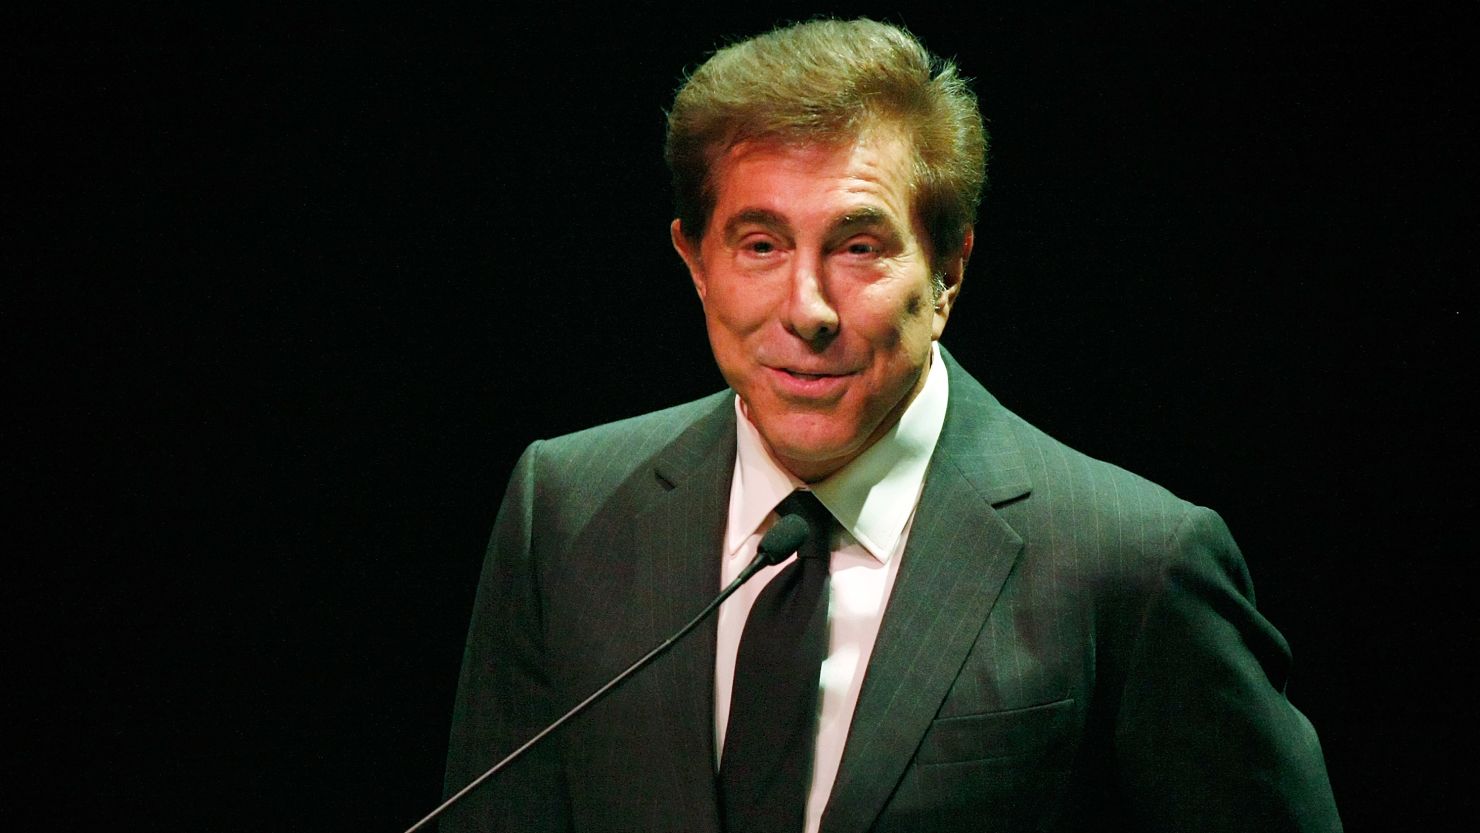 Then-Wynn Resorts chairman of the board and CEO Steve Wynn speaks at a memorial service for longtime Las Vegas entertainer Danny Gans at the Encore Las Vegas May 21, 2009 in Las Vegas, Nevada. 